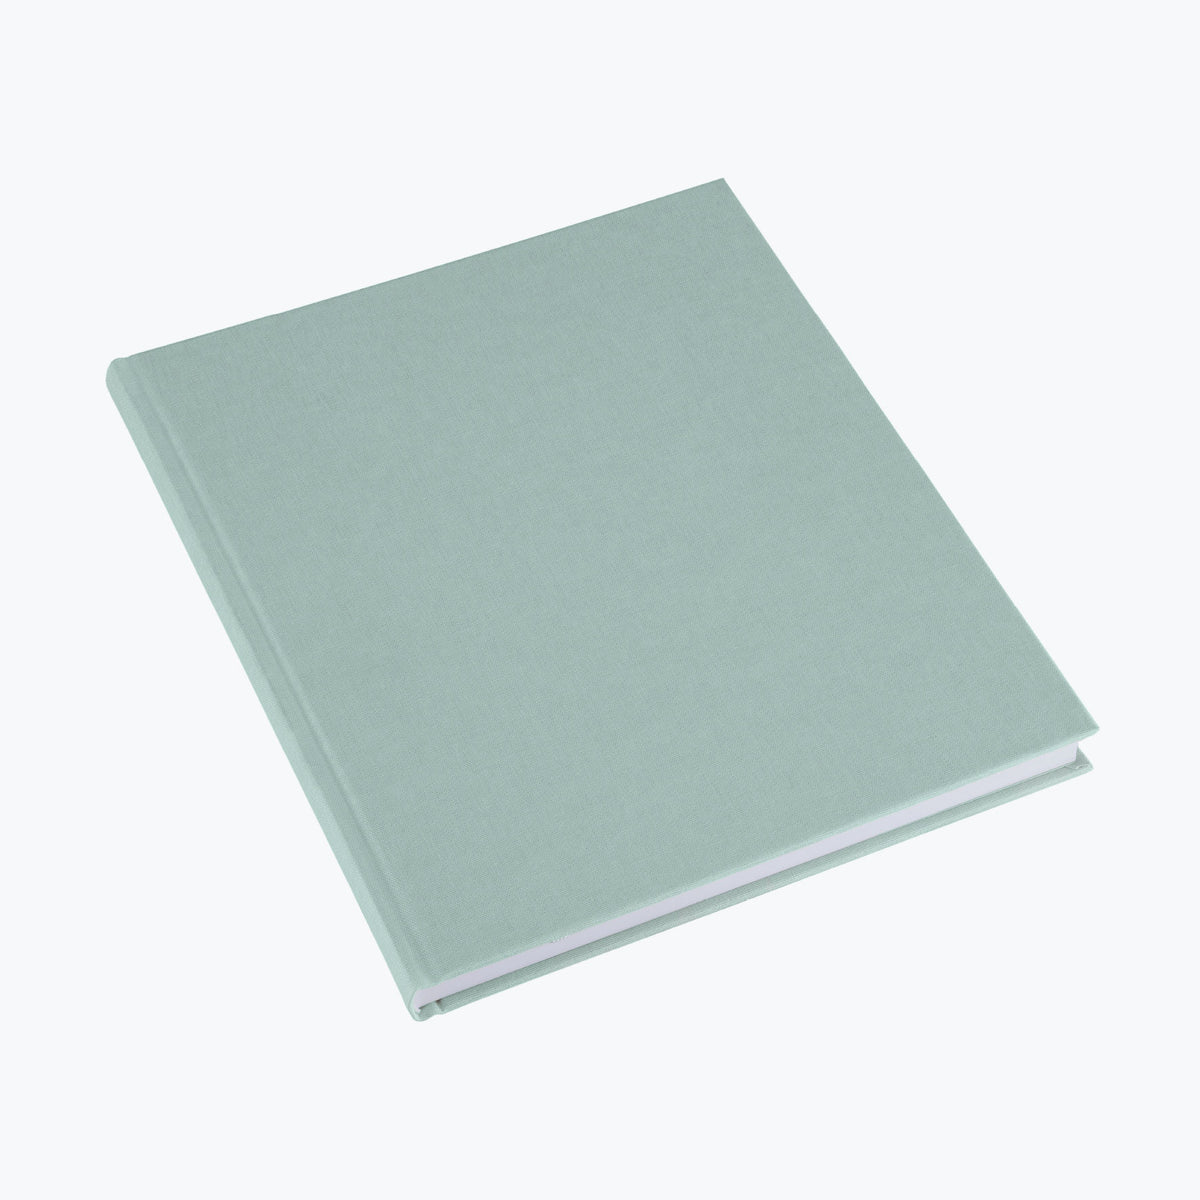 Bookbinders Design - Cloth Notebook - Large - Dusty Green